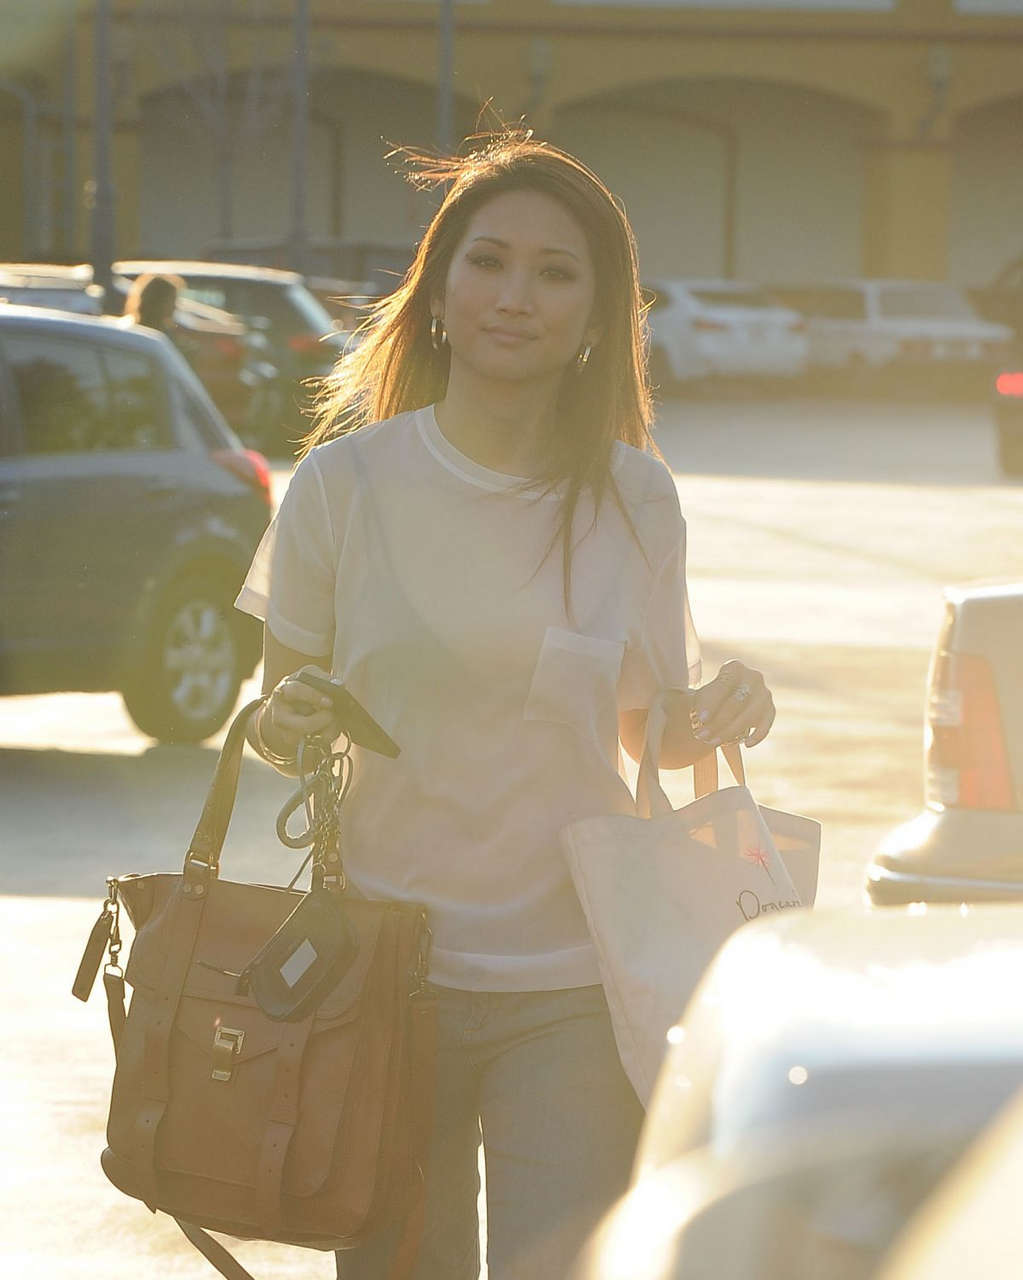 Brenda Song Out About Los Angeles